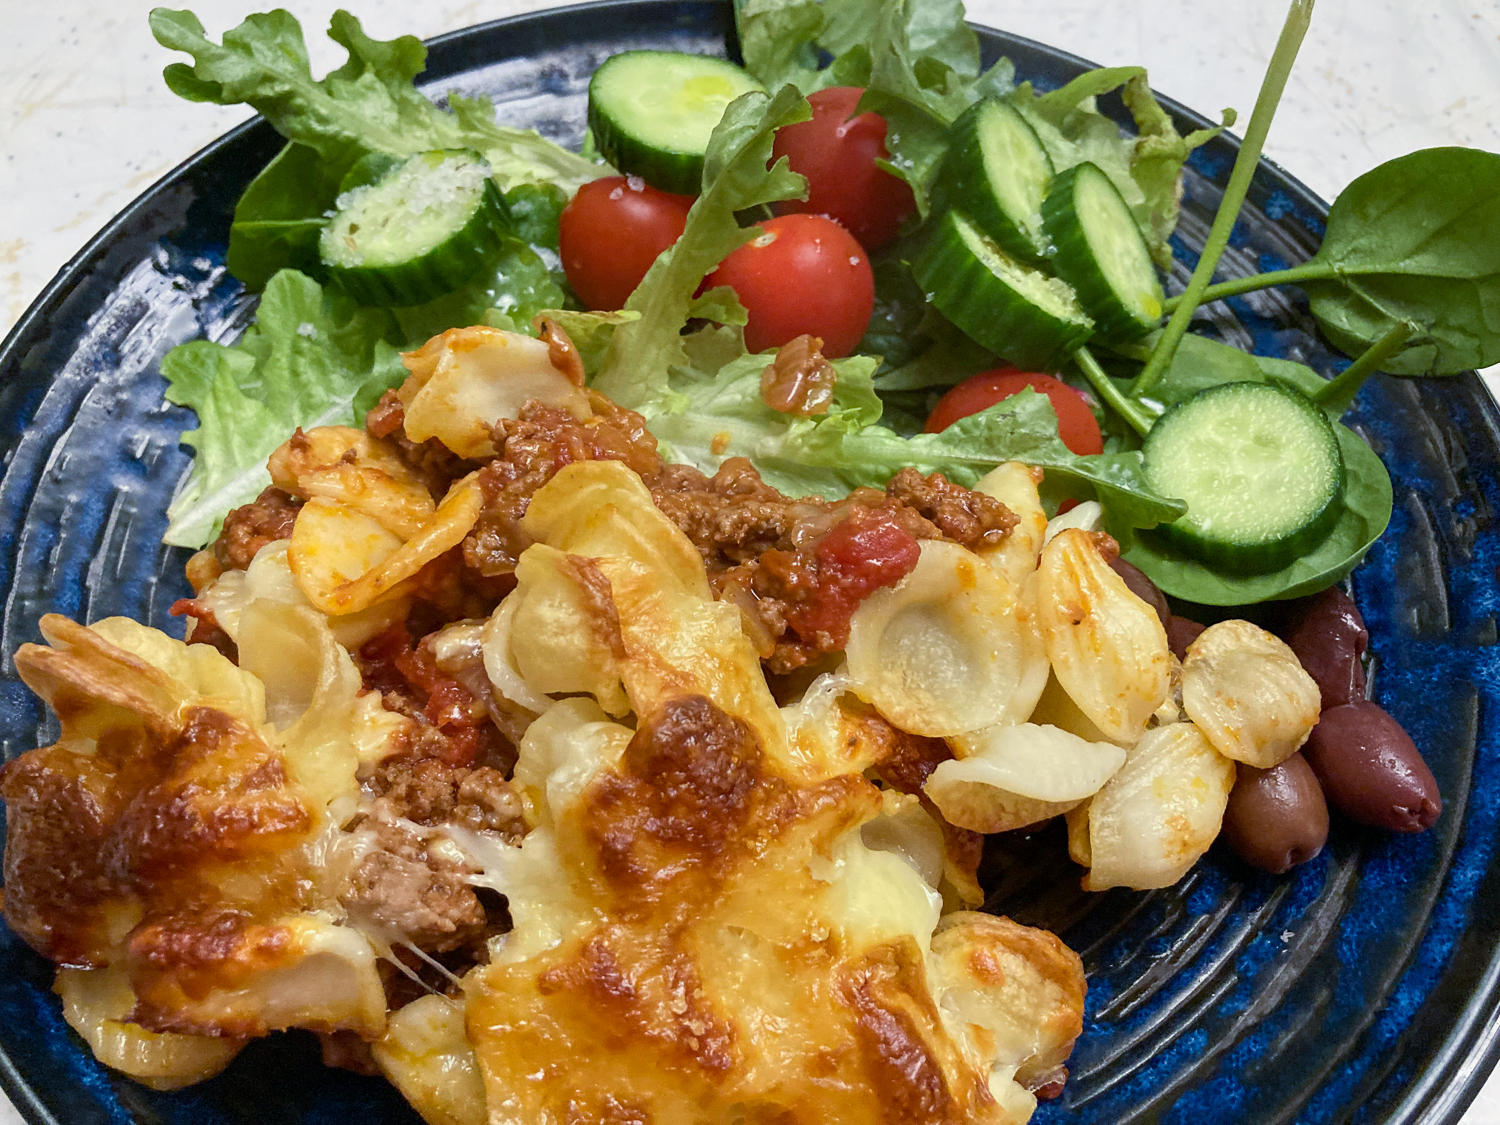 A baked pasta dish with a side salad of leaves, baby tomatoes and sliced cucumber